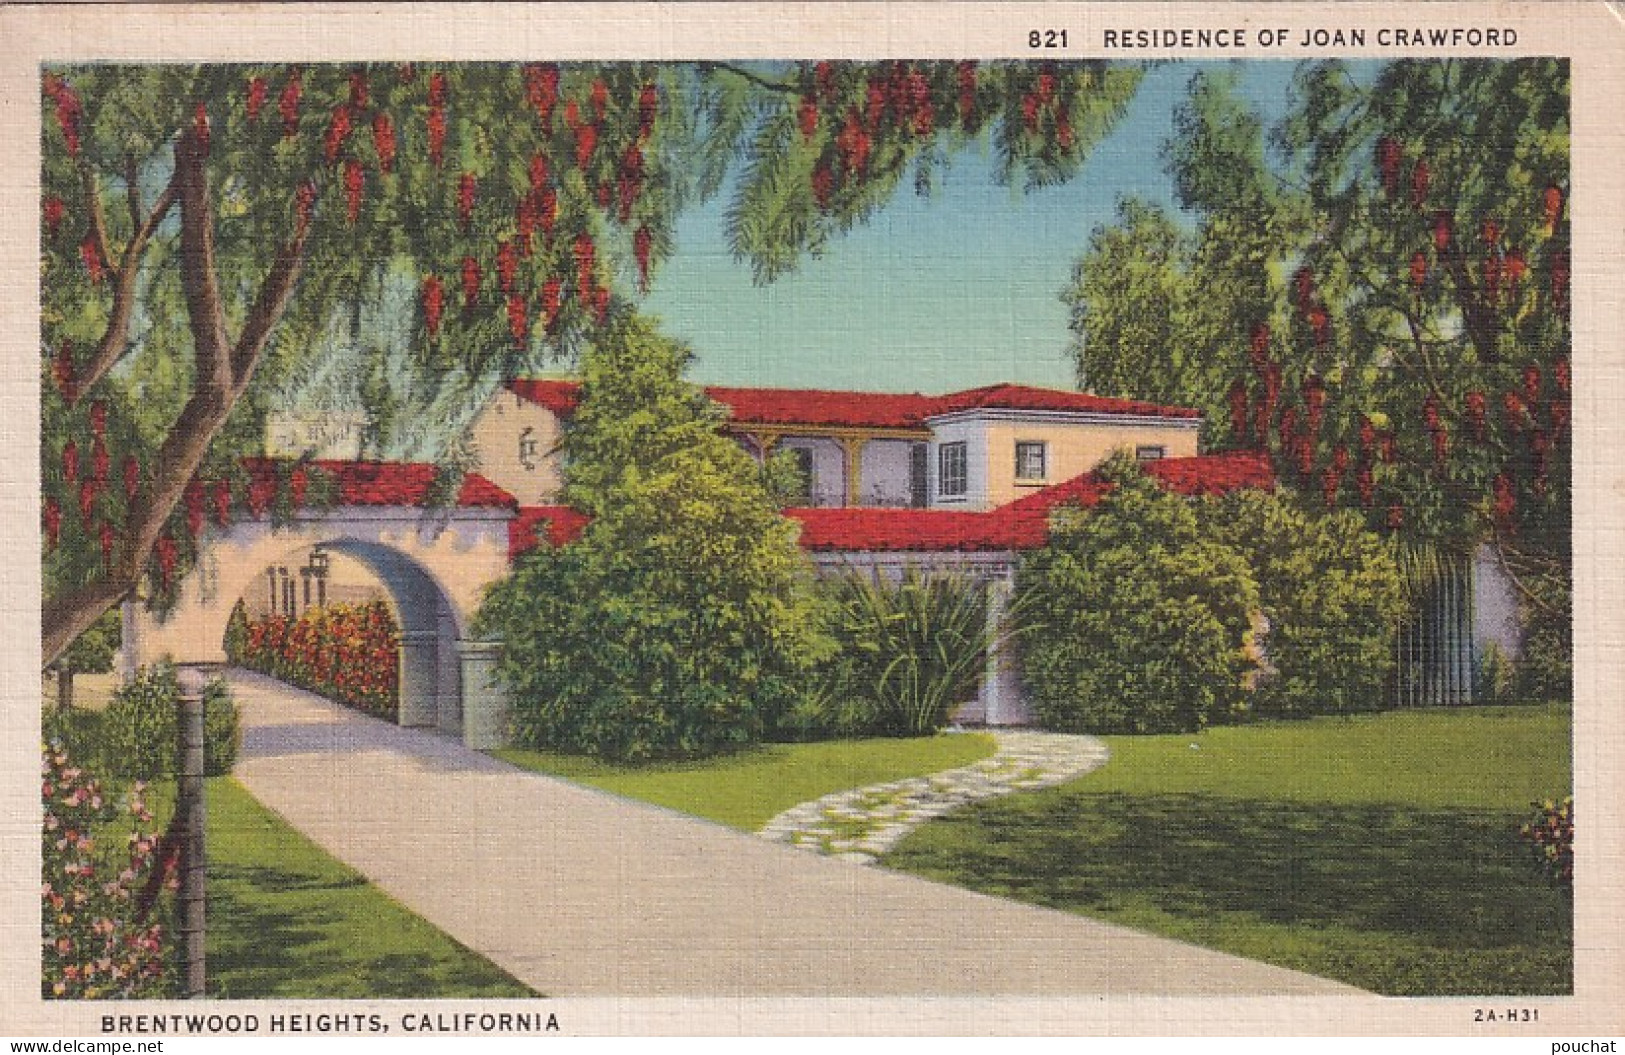 ZY 130- BRENTWOOD HEIGHTS , CALIFORNIA - RESIDENCE OF JOAN CRAWFORD - Los Angeles